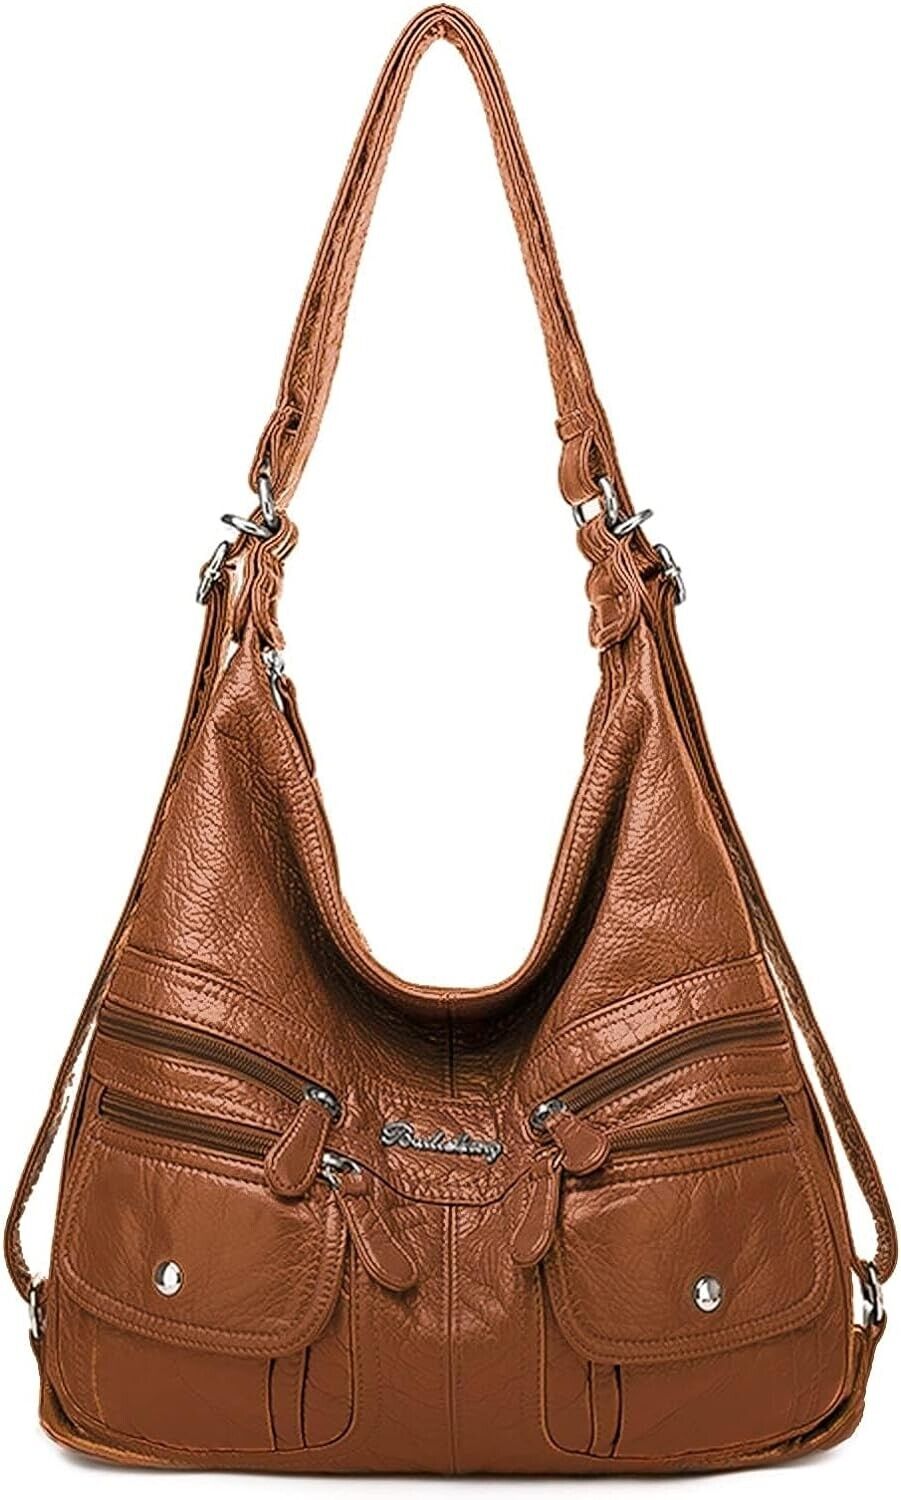 Large Boho Satchel Hobo Purse for Women - Leather Crossbody Bag with Strap